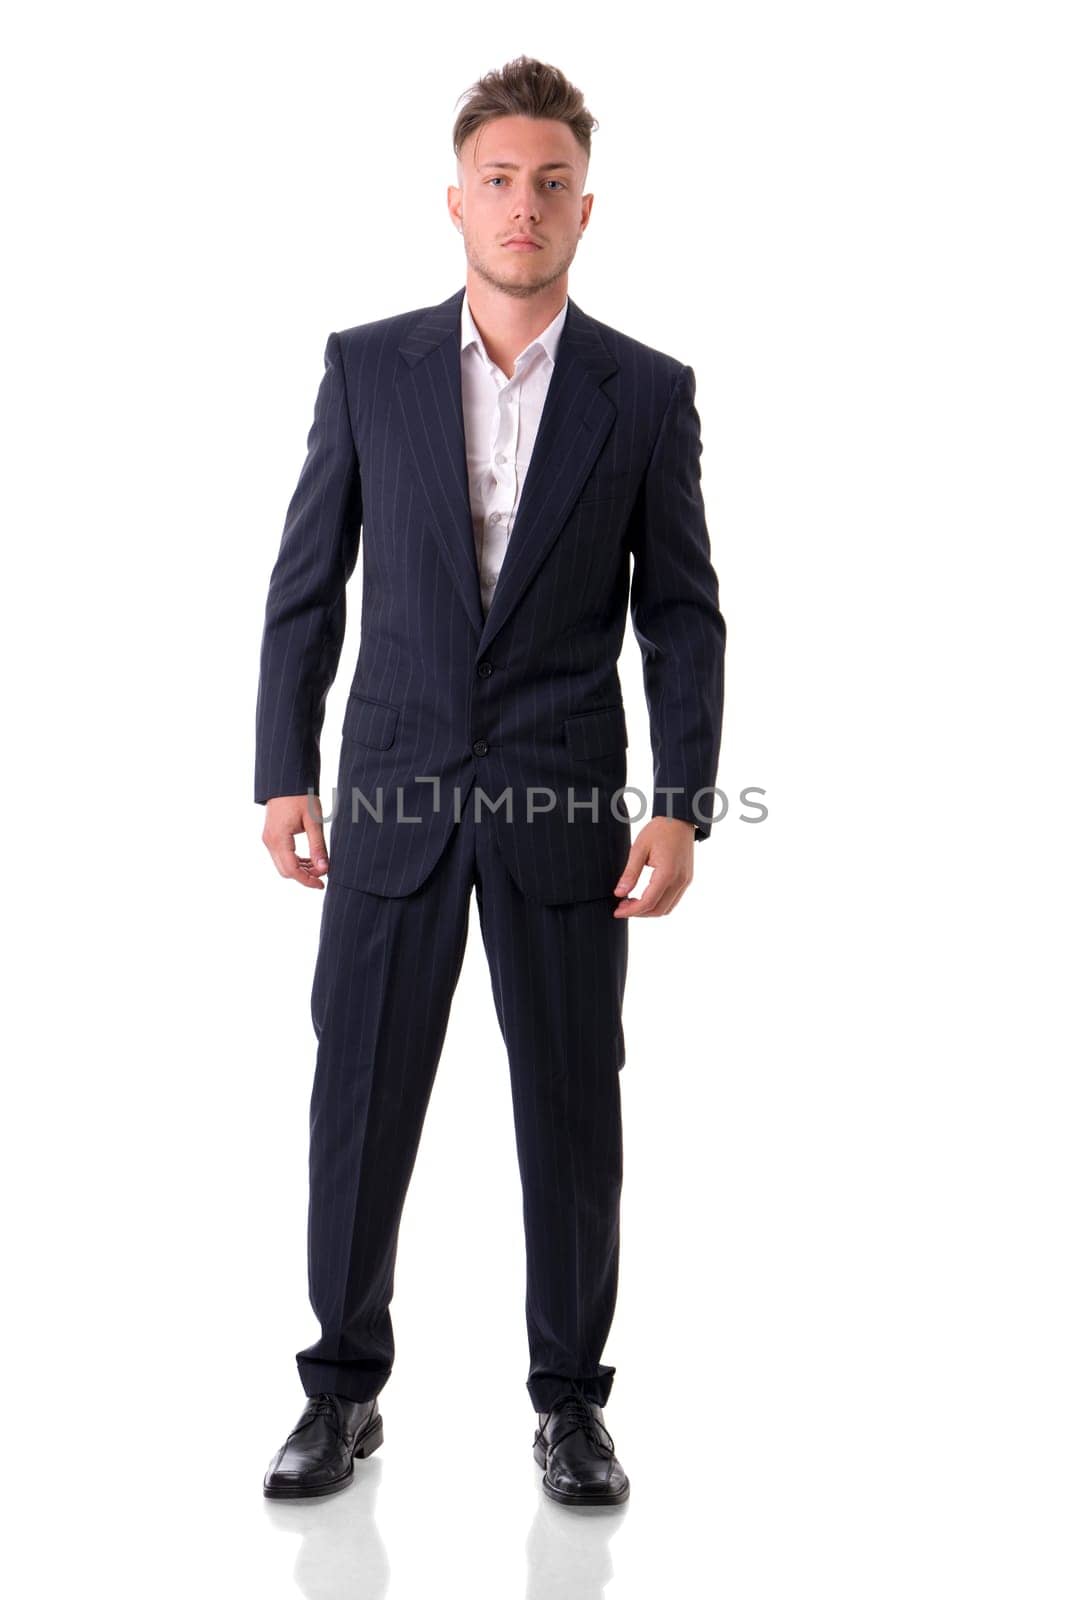 A man in a suit and tie posing for a picture, full figure shot, isolated on white in studio